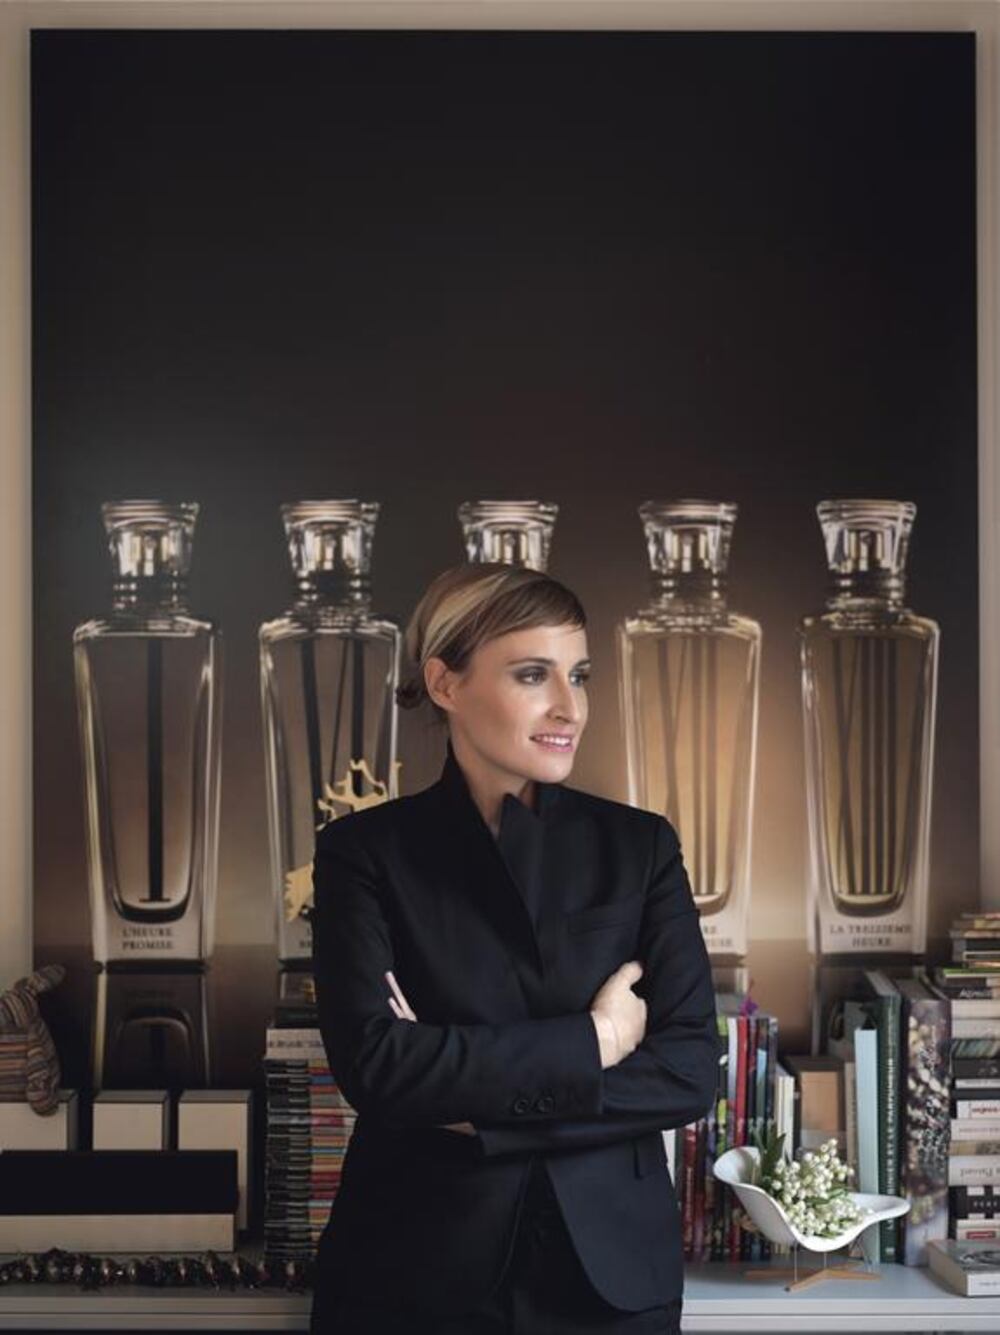 Cartier Perfumer Mathilde Laurent Calls Oud ‘a Real T’ To Perfumery